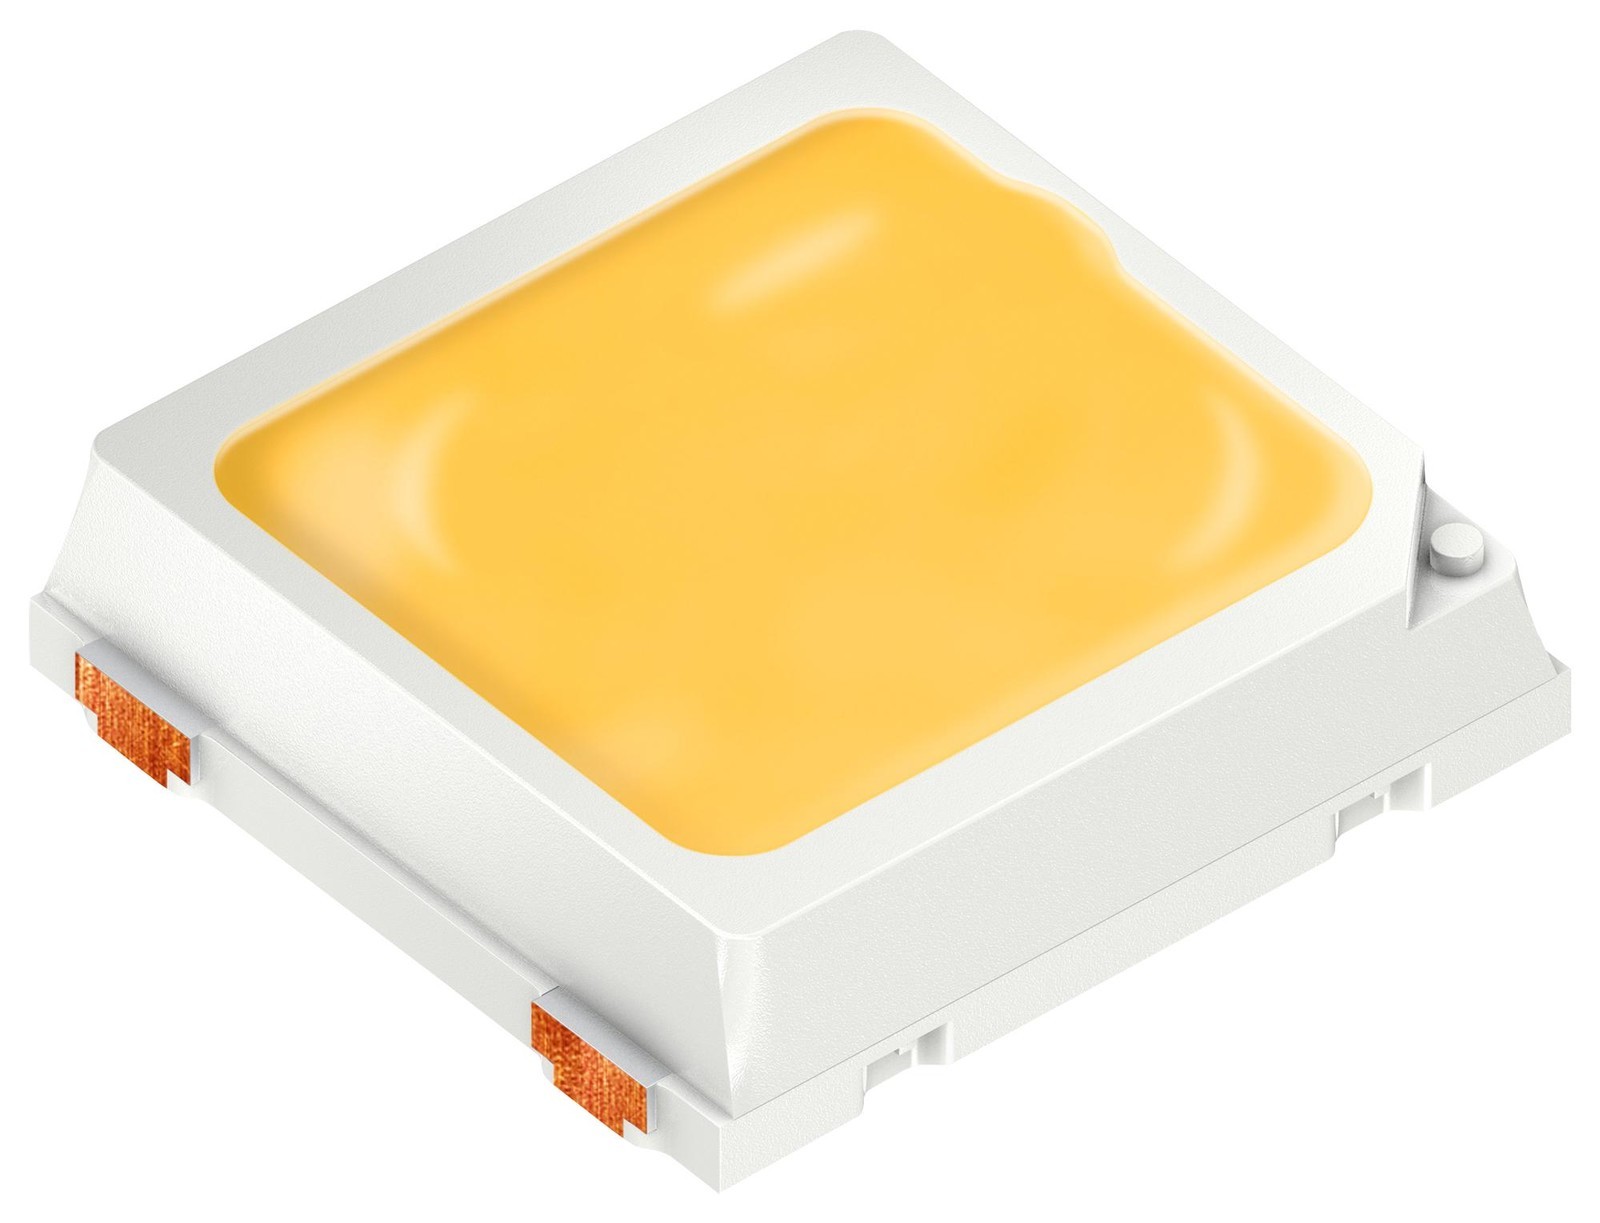 Ams Osram Group Gw Qslms2.em-H7H9-Xx33-1U1V-65-R18 Led, 3.2 X 3mm, Cool White, 42Lm